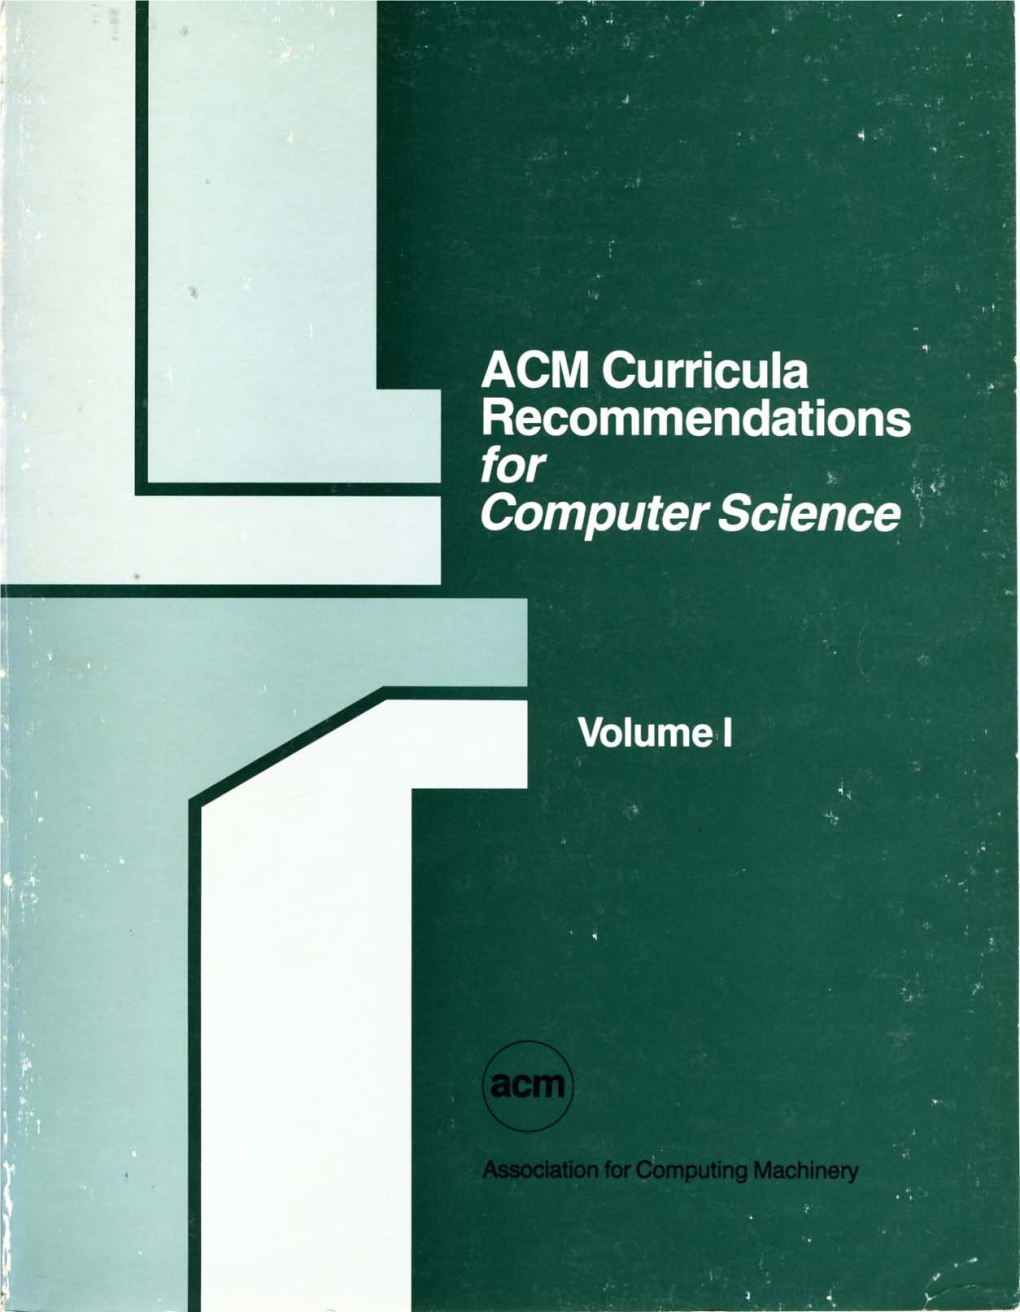 Curriculum '68: Recommendations for Academic Programs